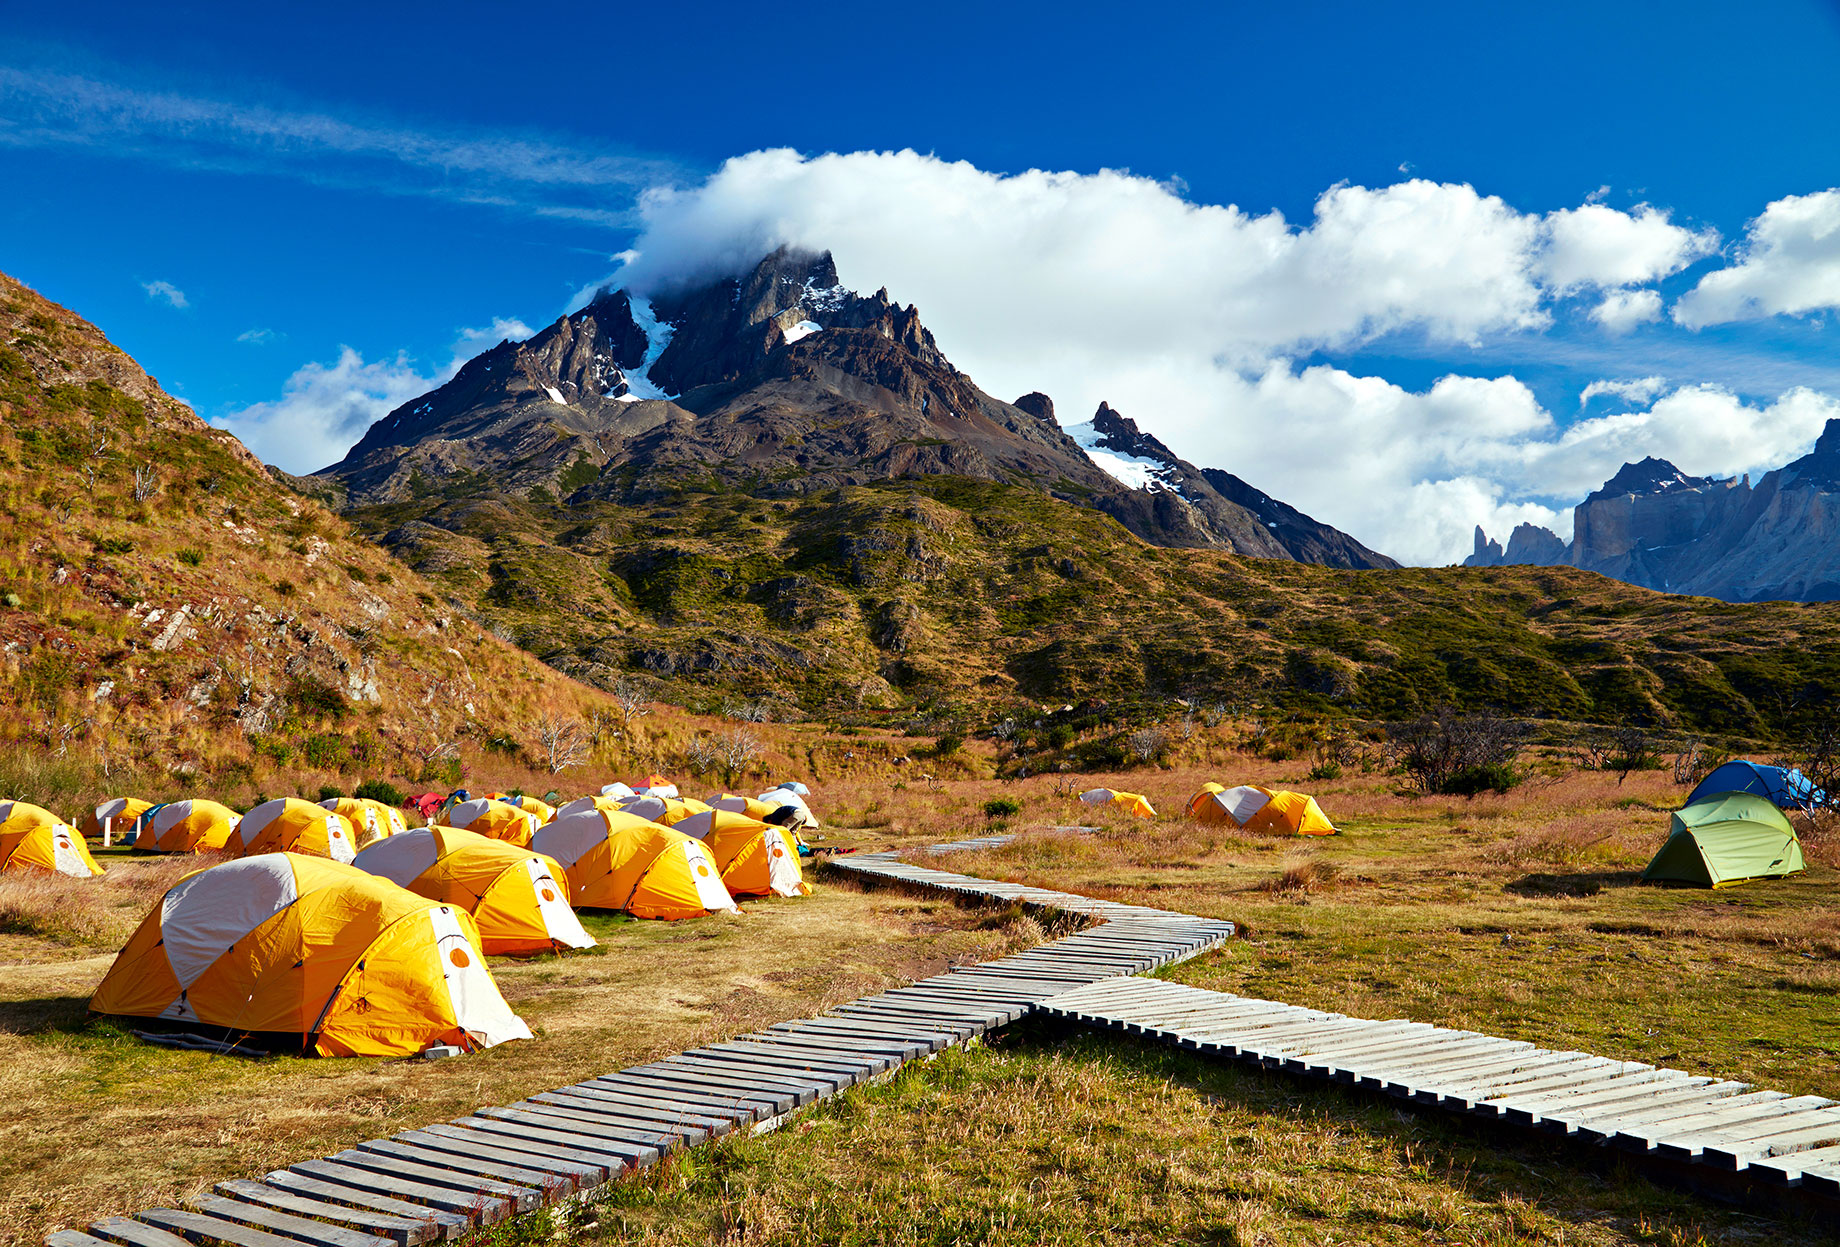 Camping in Torres del Paine National Park - Patagonia, Chile